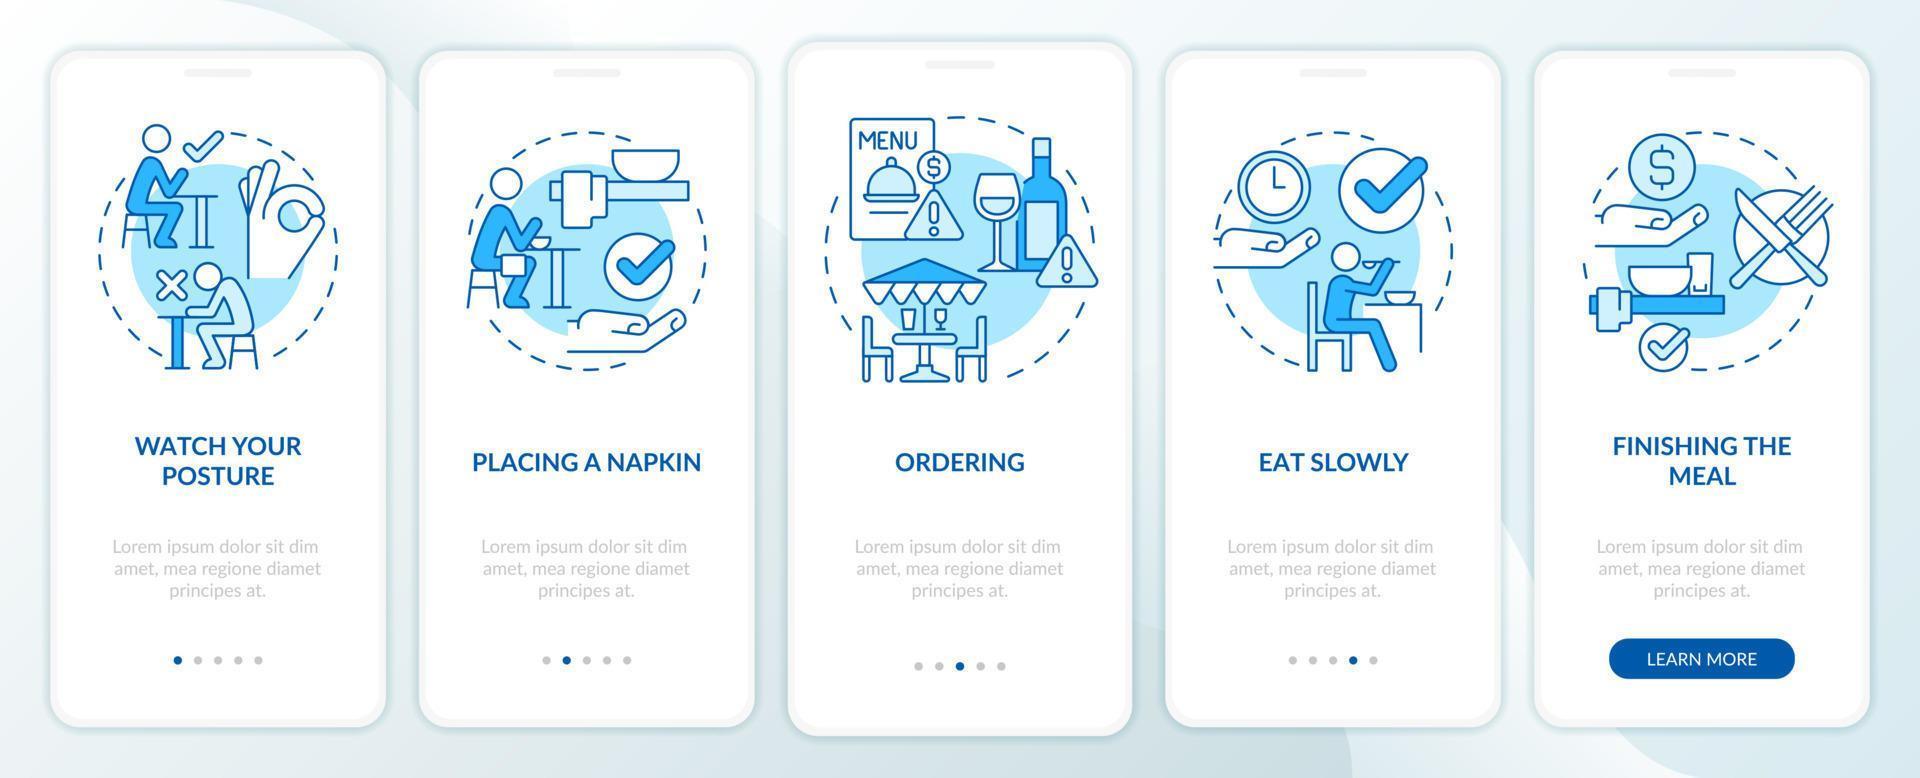 Restaurant etiquette blue onboarding mobile app screen. Table manners walkthrough 5 steps graphic instructions pages with linear concepts. UI, UX, GUI template. vector